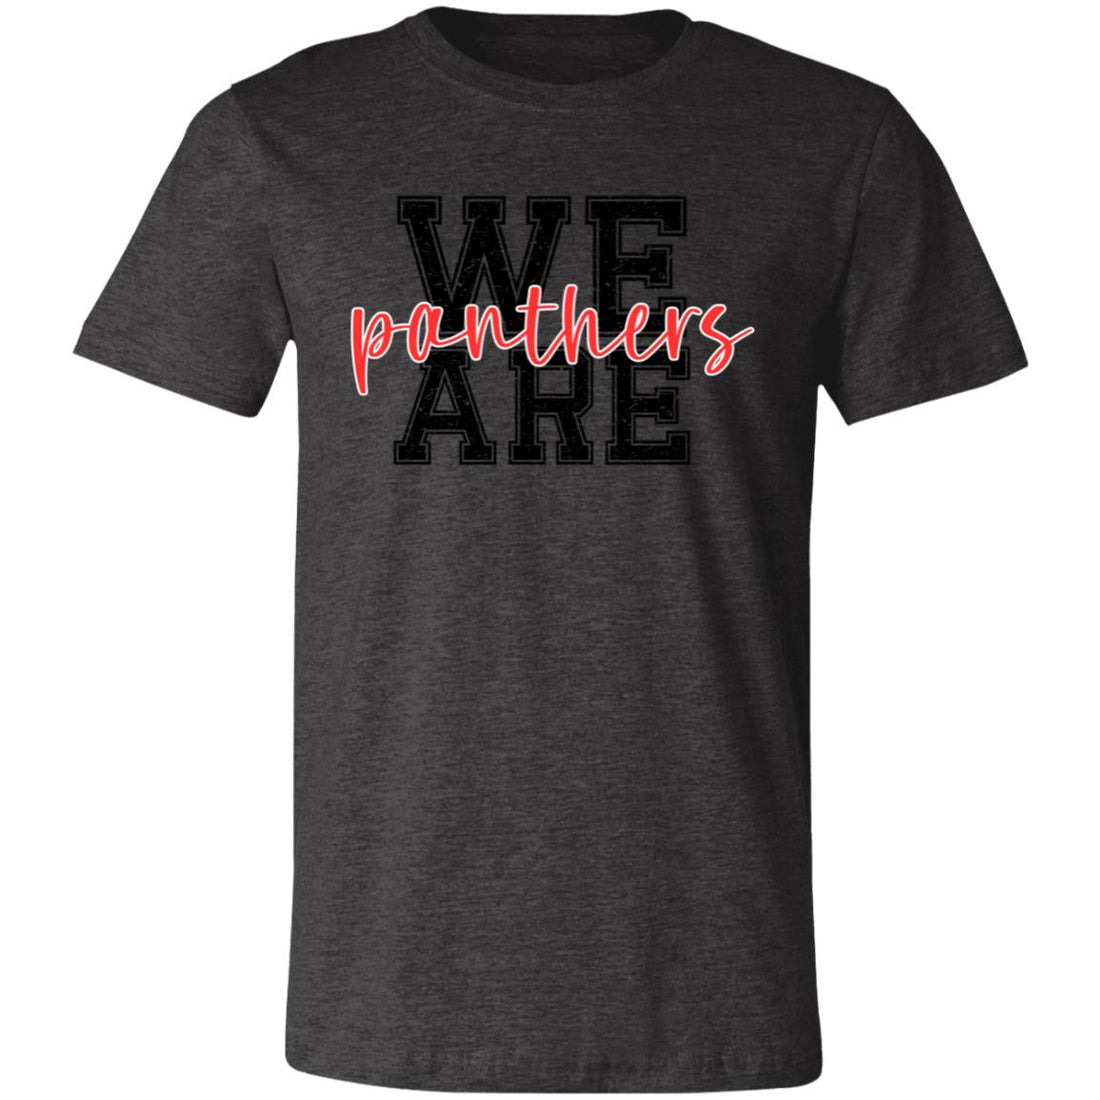 We Are Panthers Unisex Jersey Short-Sleeve T-Shirt - T-Shirts - Positively Sassy - We Are Panthers Unisex Jersey Short-Sleeve T-Shirt